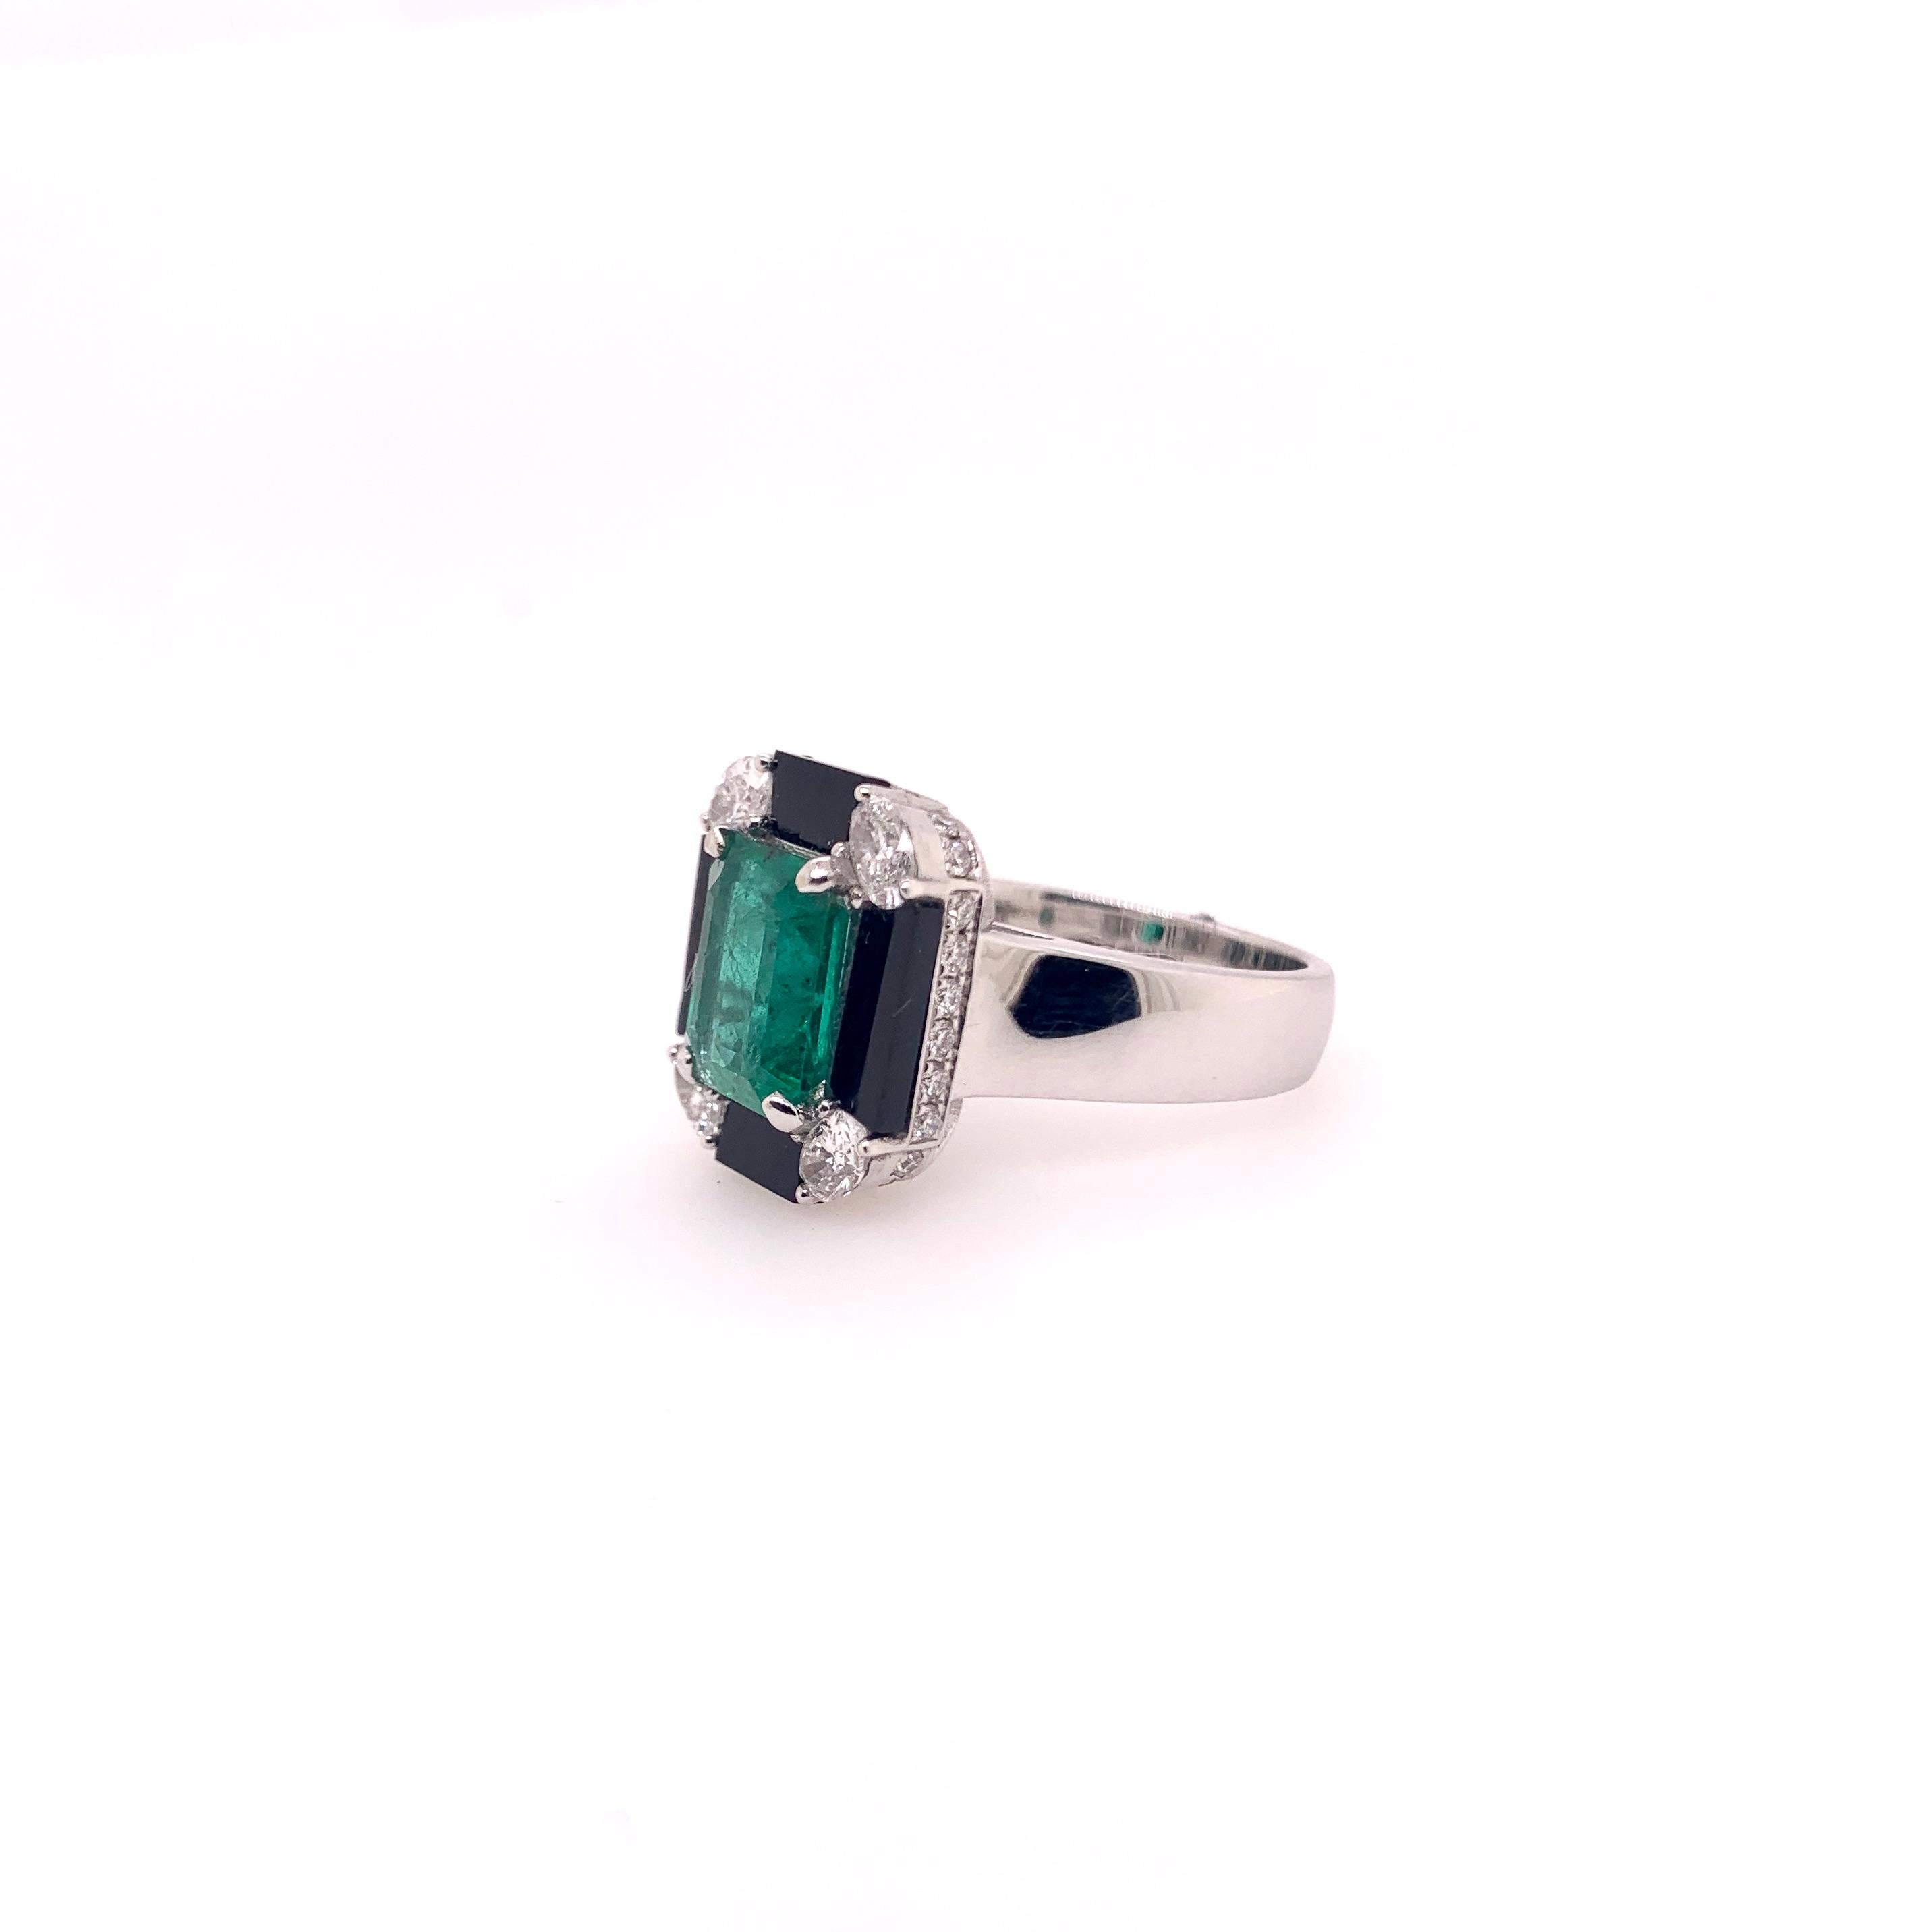 This stunning Zambian emerald and onyx combination cocktail ring will truly gather everyone's attention with this Art Deco look.   The oval diamonds in the corners give a nice accent to this handmade setting.  The custom cut onyx fits like a puzzle